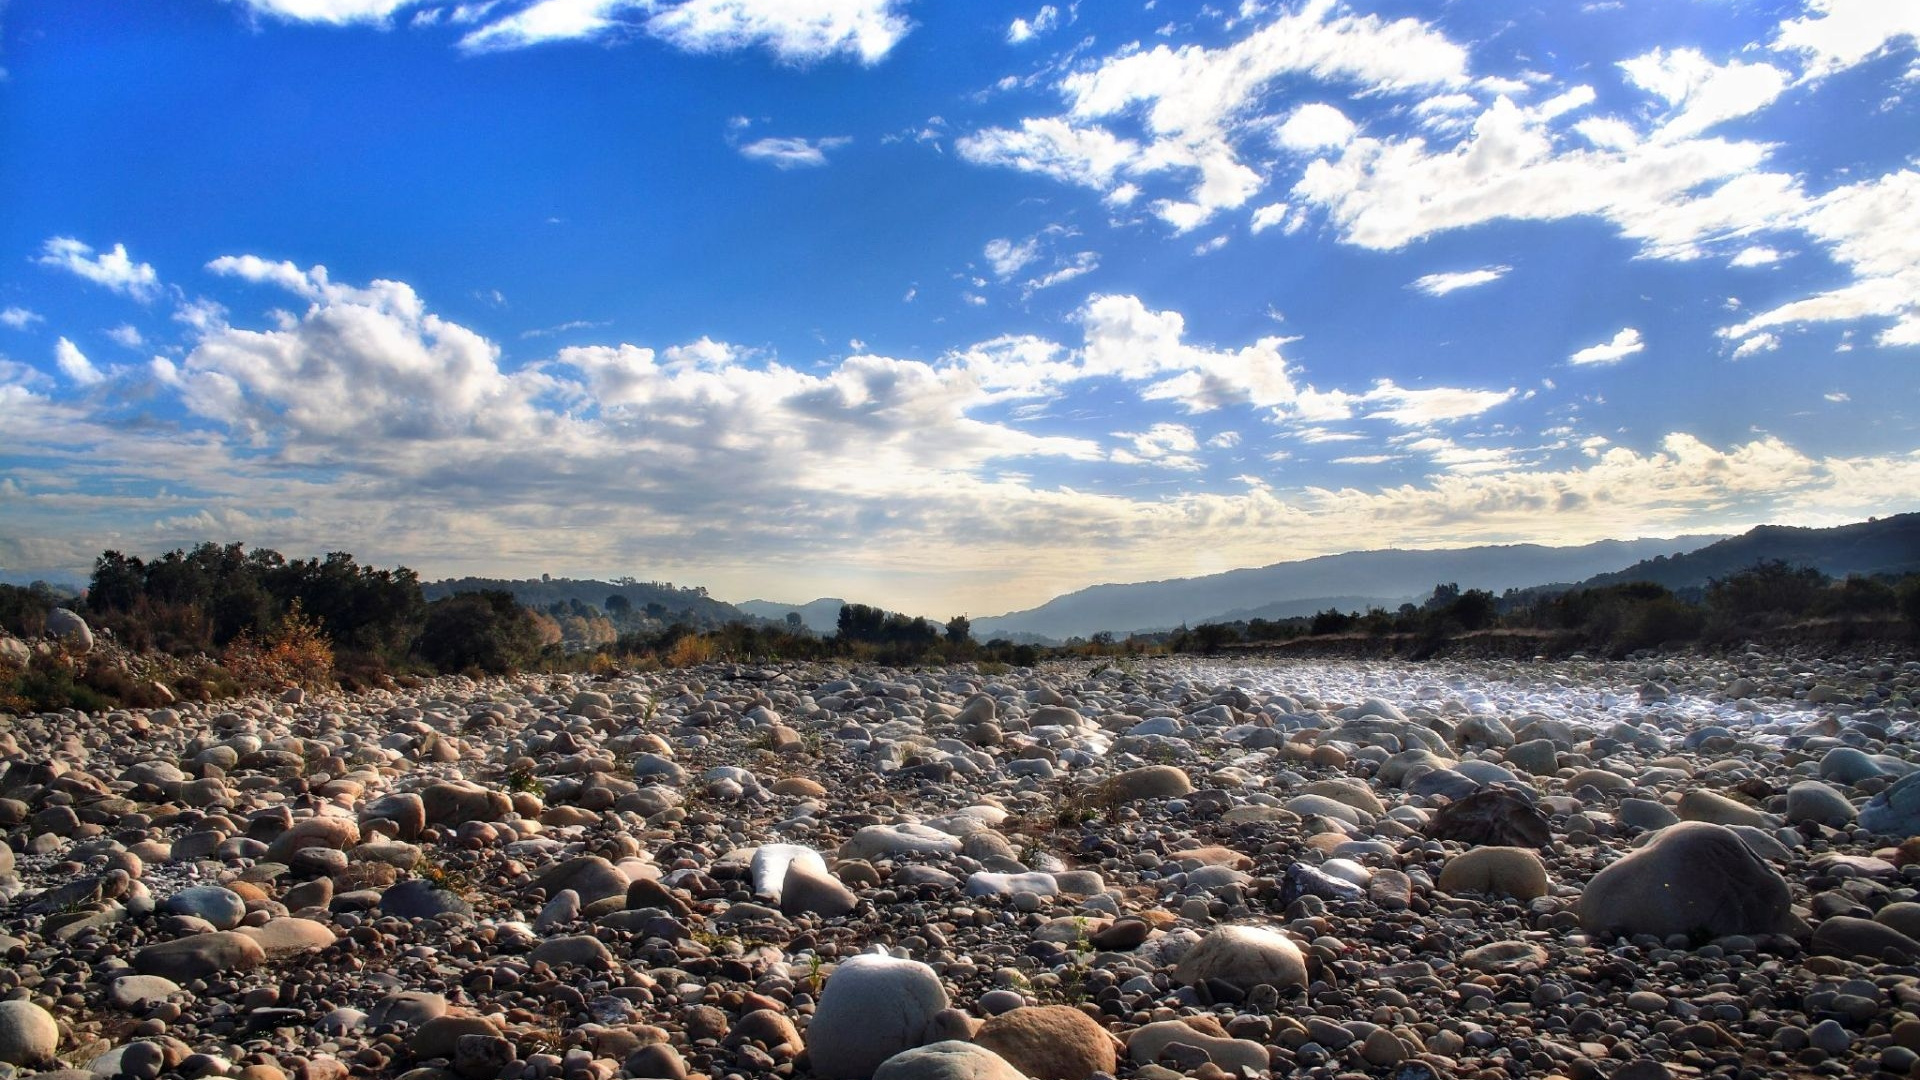 Gray and Black Stones on Seashore Under Blue Sky During Daytime. Wallpaper in 1920x1080 Resolution